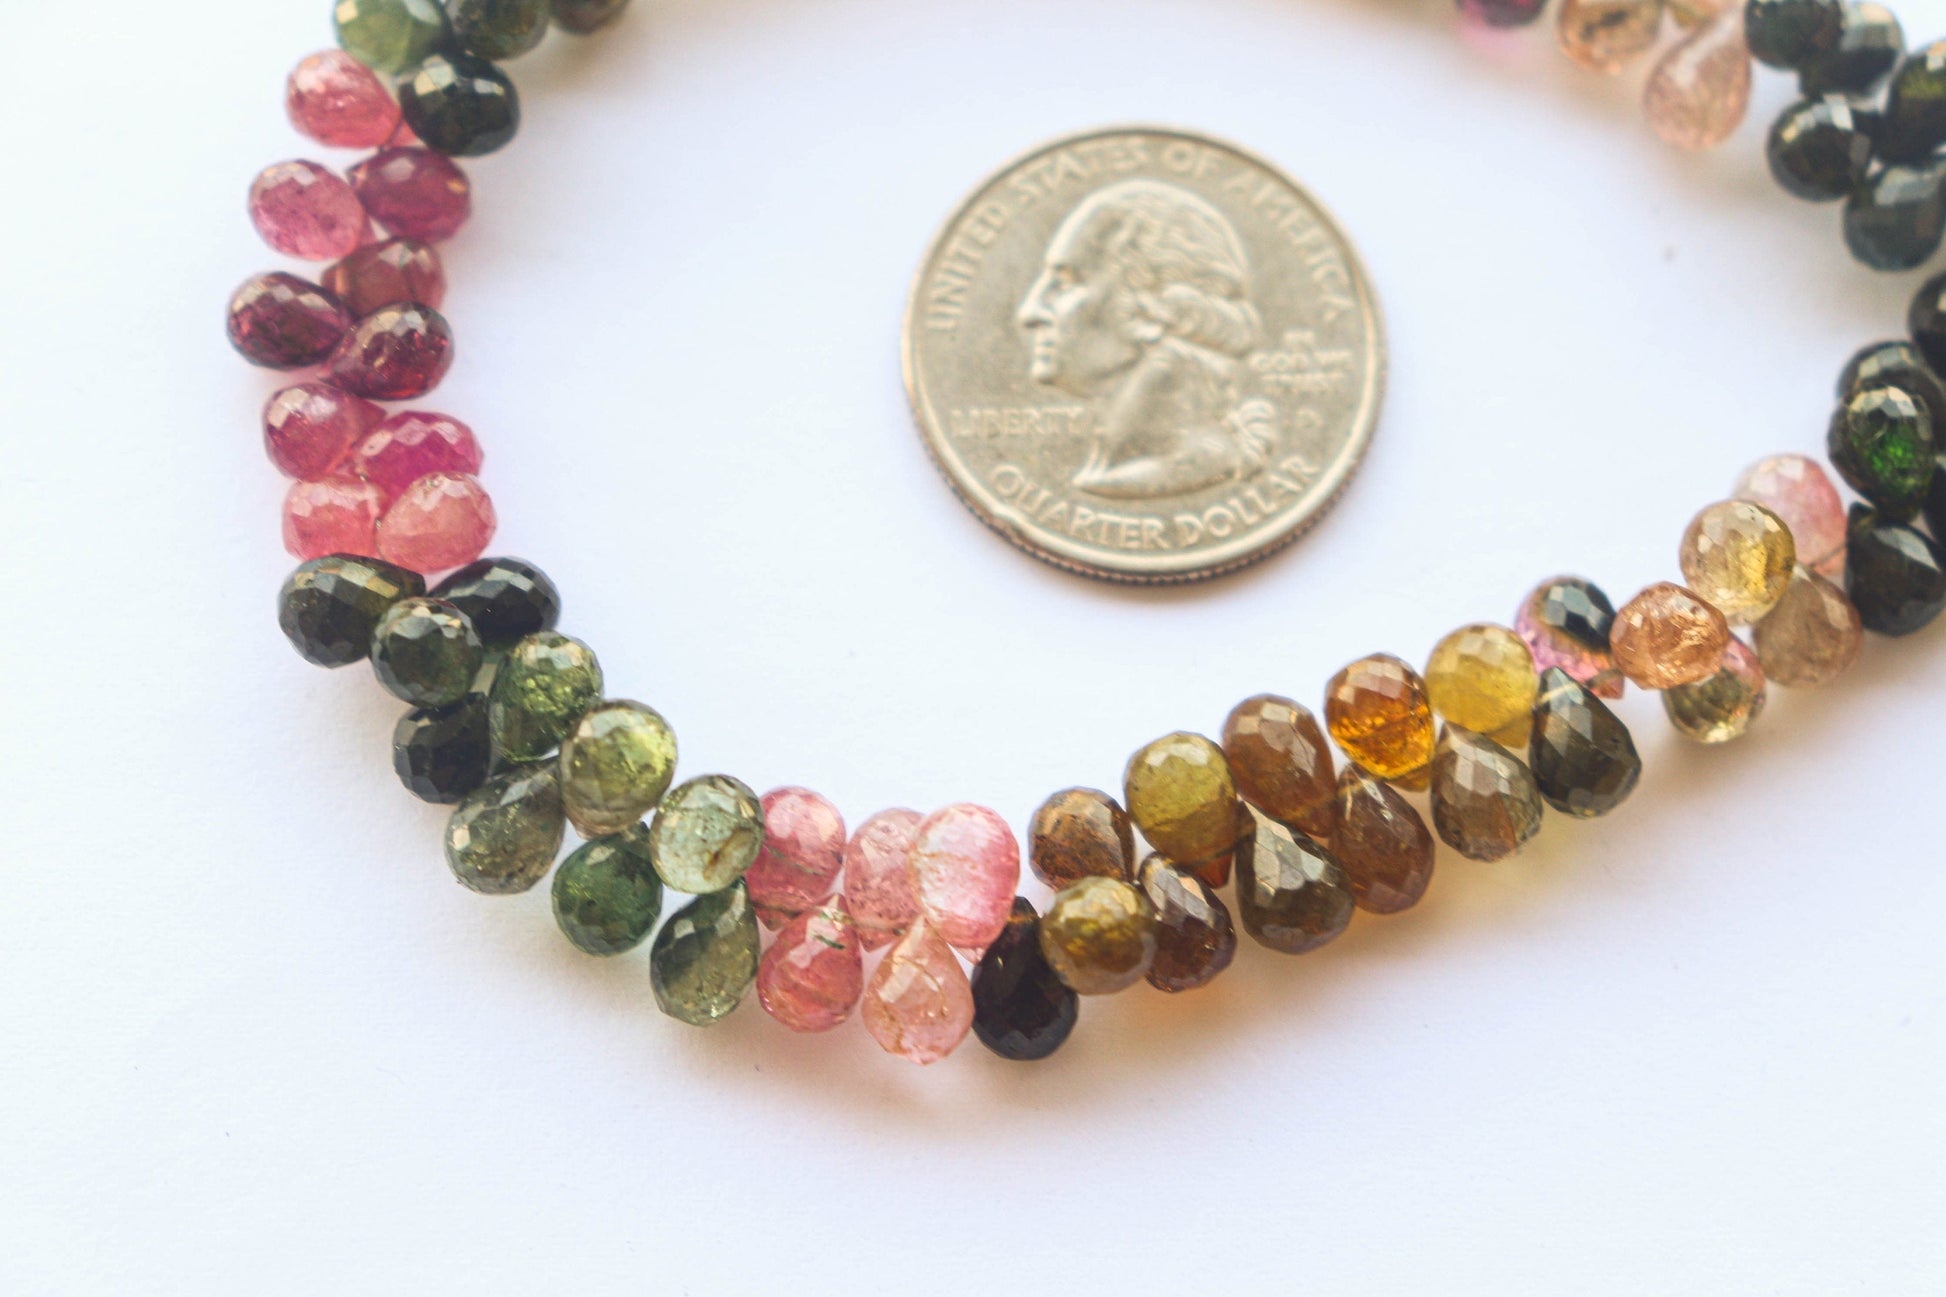 Multi Tourmaline Faceted Drops | 5x7mm | 9 inch | 89 Pieces | Natural Tourmaline Gemstone | Beadsforyourjewellery | BFYJ893 Beadsforyourjewelry